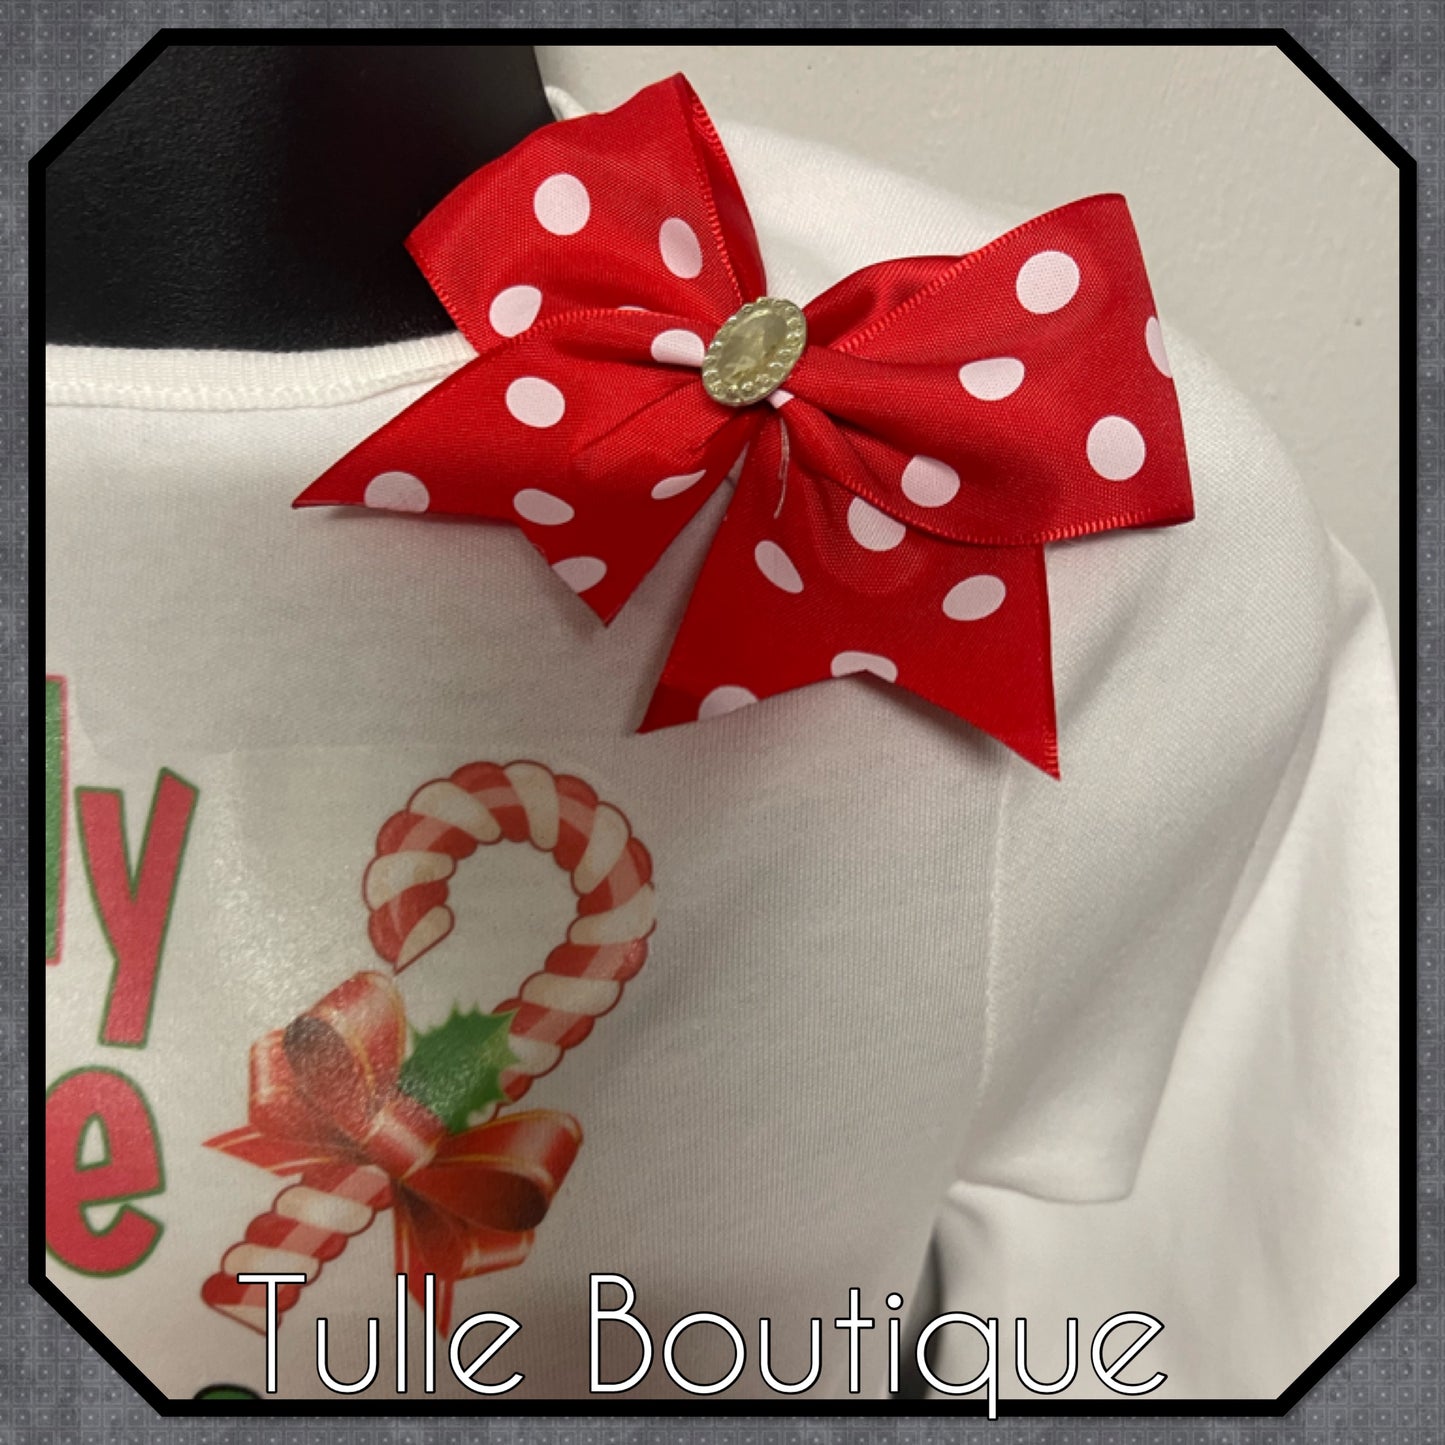 Christmas candy cane cutie T-shirt and tutu birthday party outfit